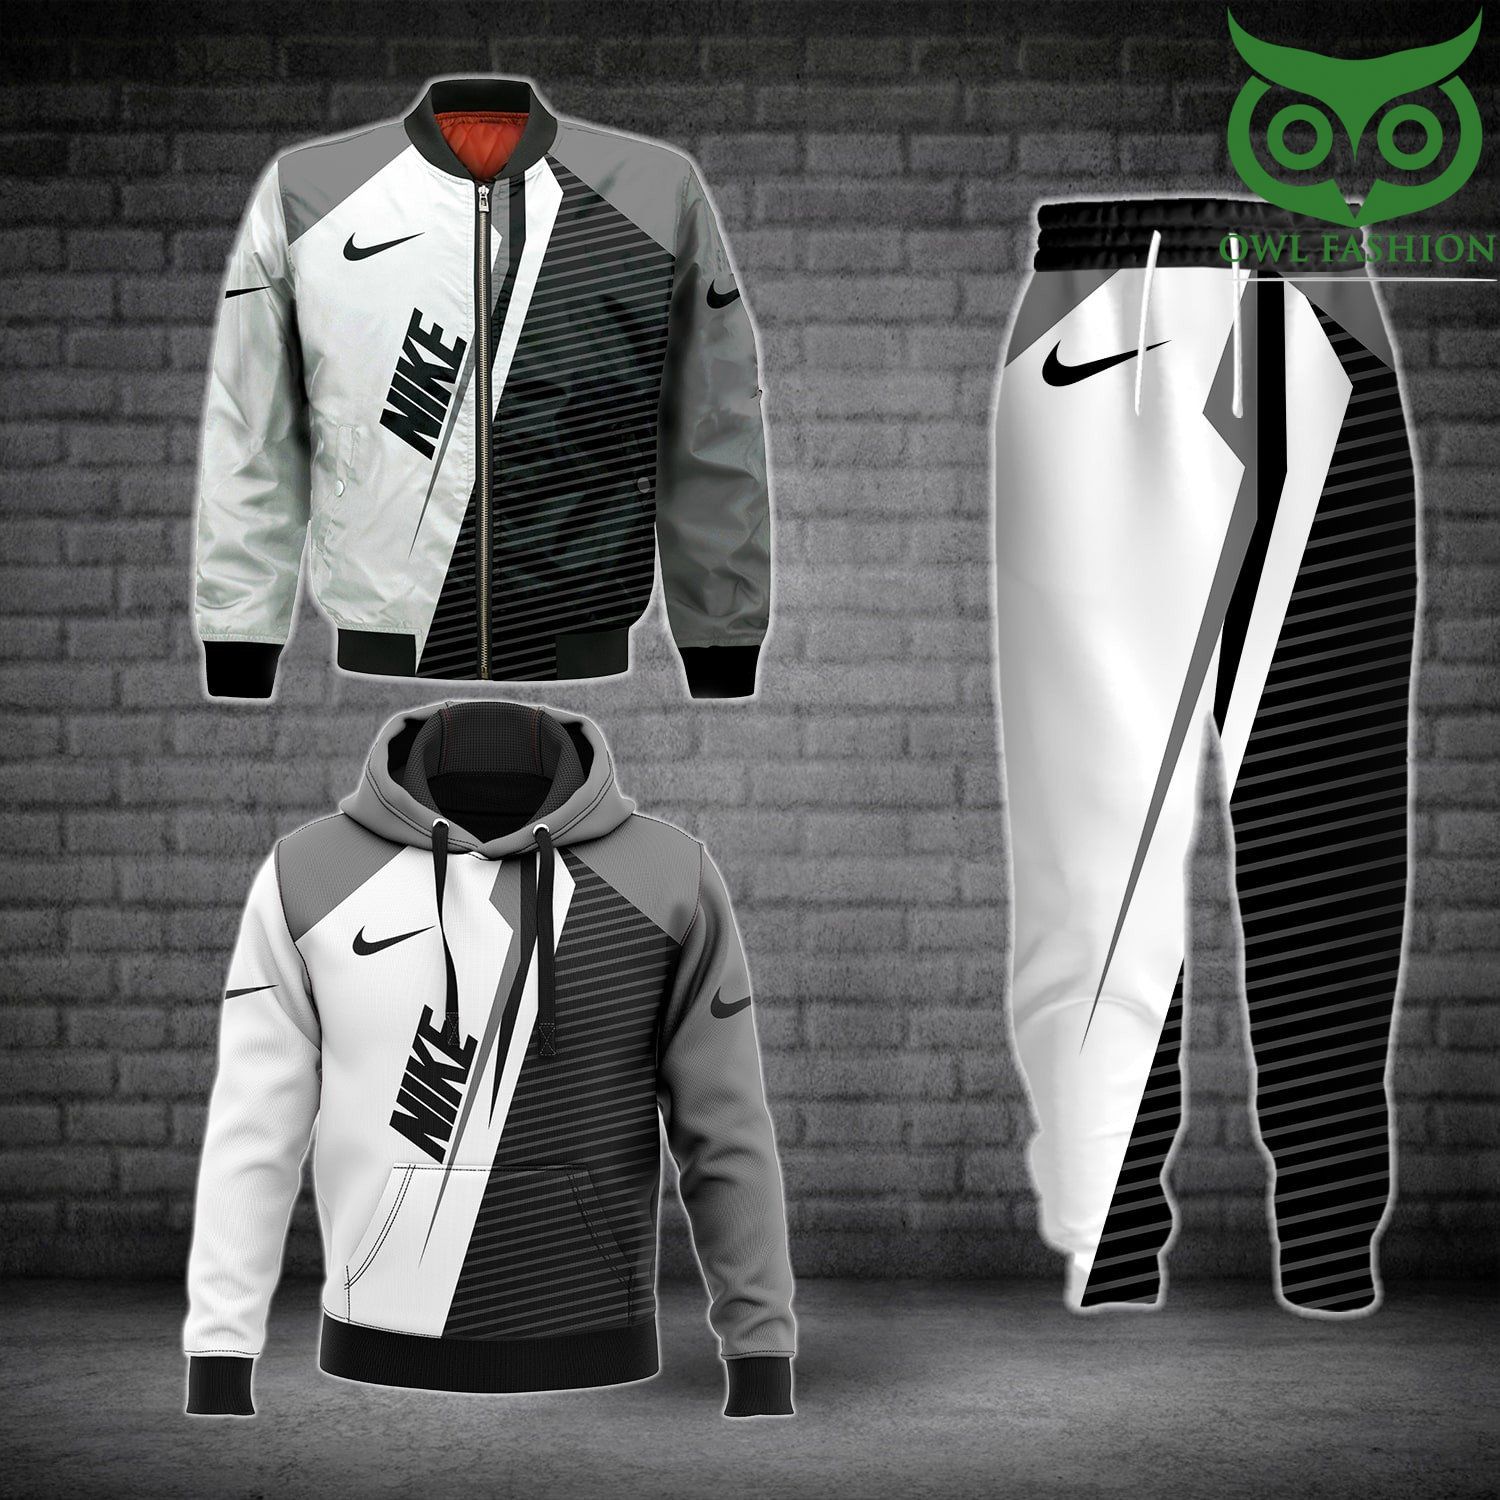 17 Nike black and white stripes pattern bomber jacket hoodies and sweatpants